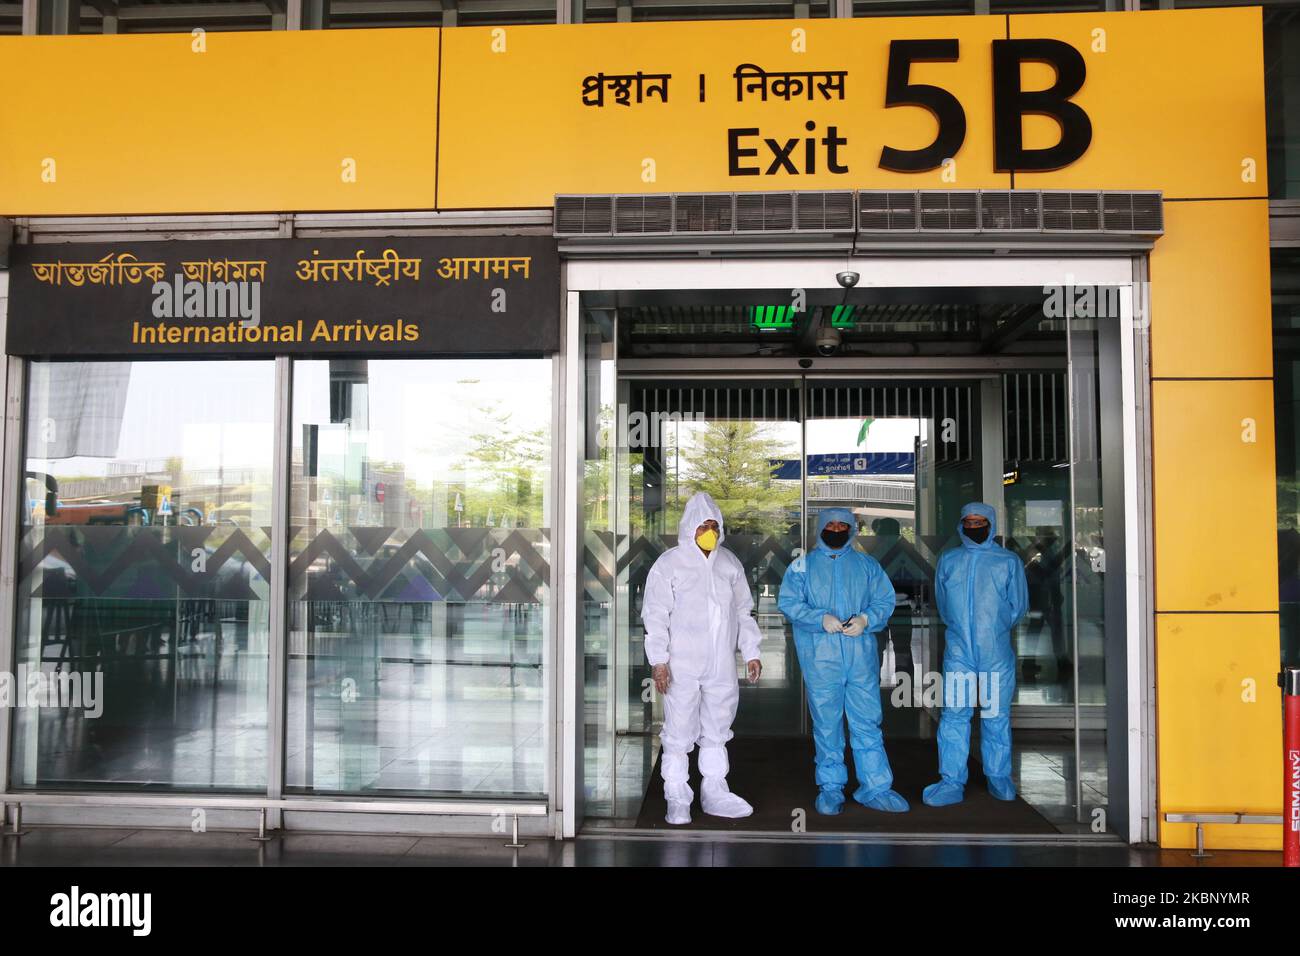 Health Worker wait to screen passenger traveling fro Bangladesh during a nationwide lockdown imposed as a preventive measure against the COVID-19 coronavirus on May 18,2020 in NSCBI Air Port in Kolkata,India.The first repatriation flight to West Bengal under the Vande Bharat Mission landed at the Kolkata airport on Monday from Bangladesh with 169 people, including 16 in need of medical emergency treatment and a pregnant woman,External Affairs Minister S Jaishankar welcomed the passengers and thanked the Ministry of Civil Aviation and the West Bengal government for working in coordination to fa Stock Photo